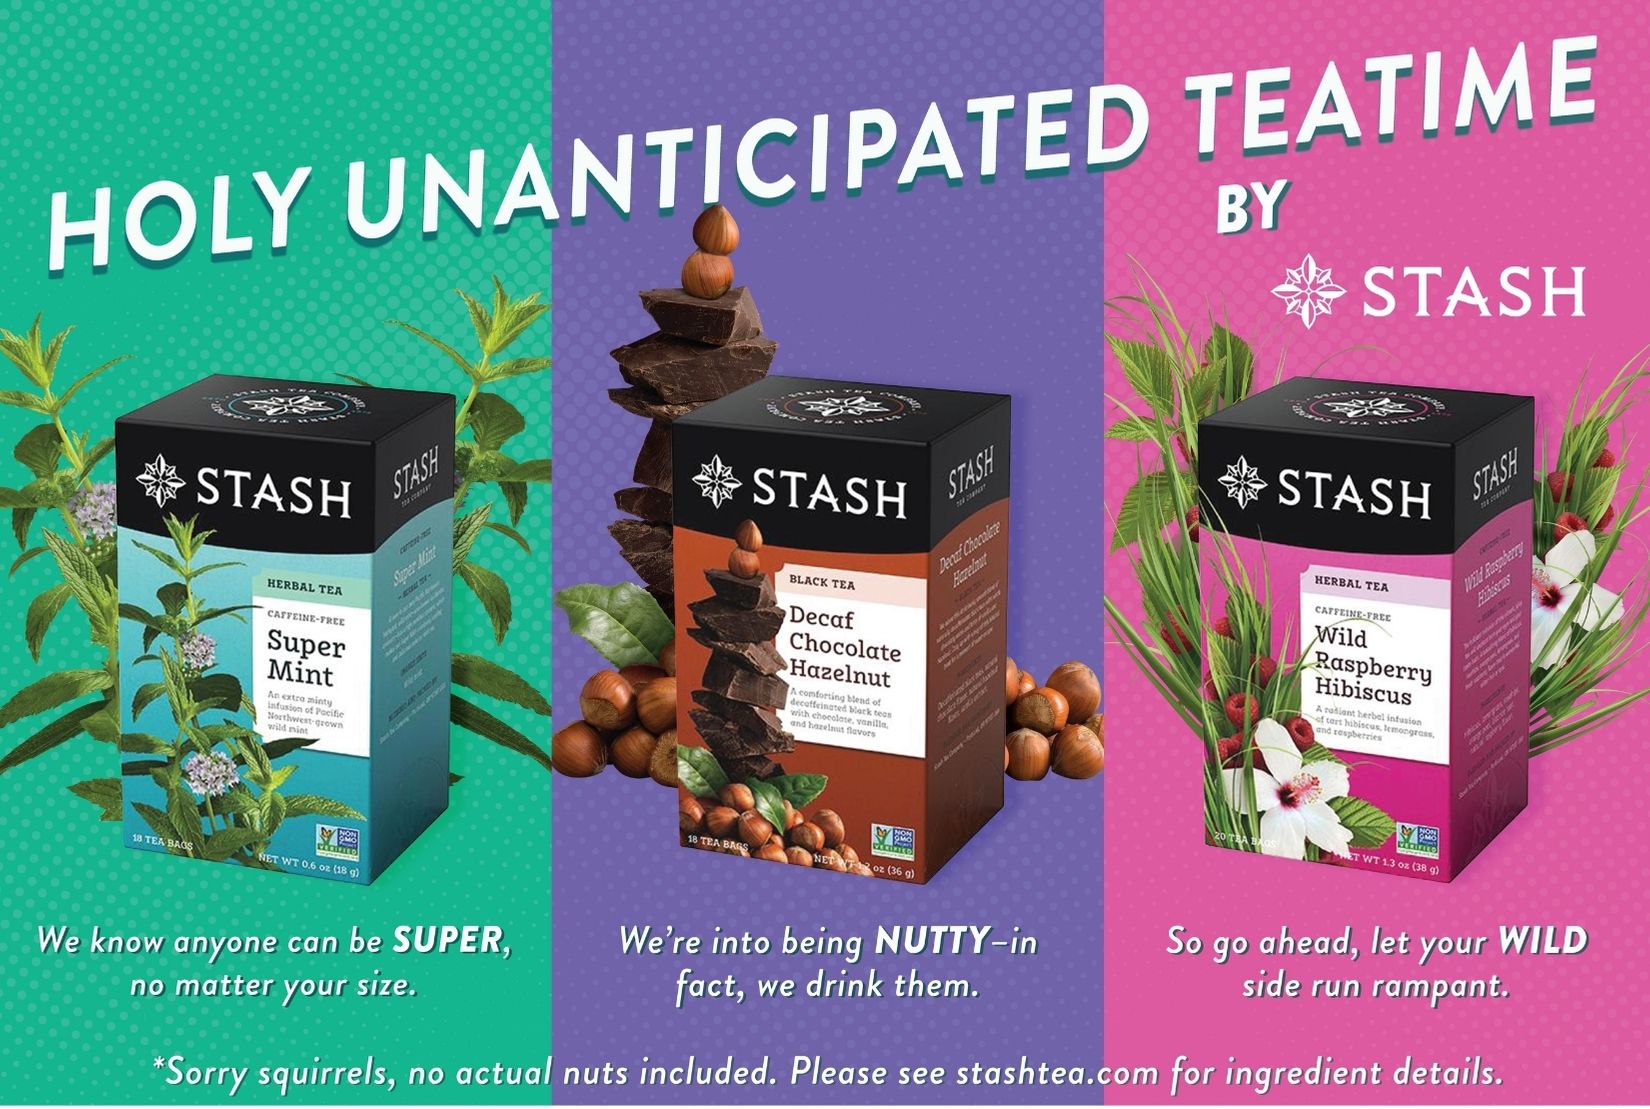 Visit https://www.stashtea.com/pages/disneyfloraandulysses to learn more about the premiere, and to get a bundle of Super delicious and wild tasting teas.